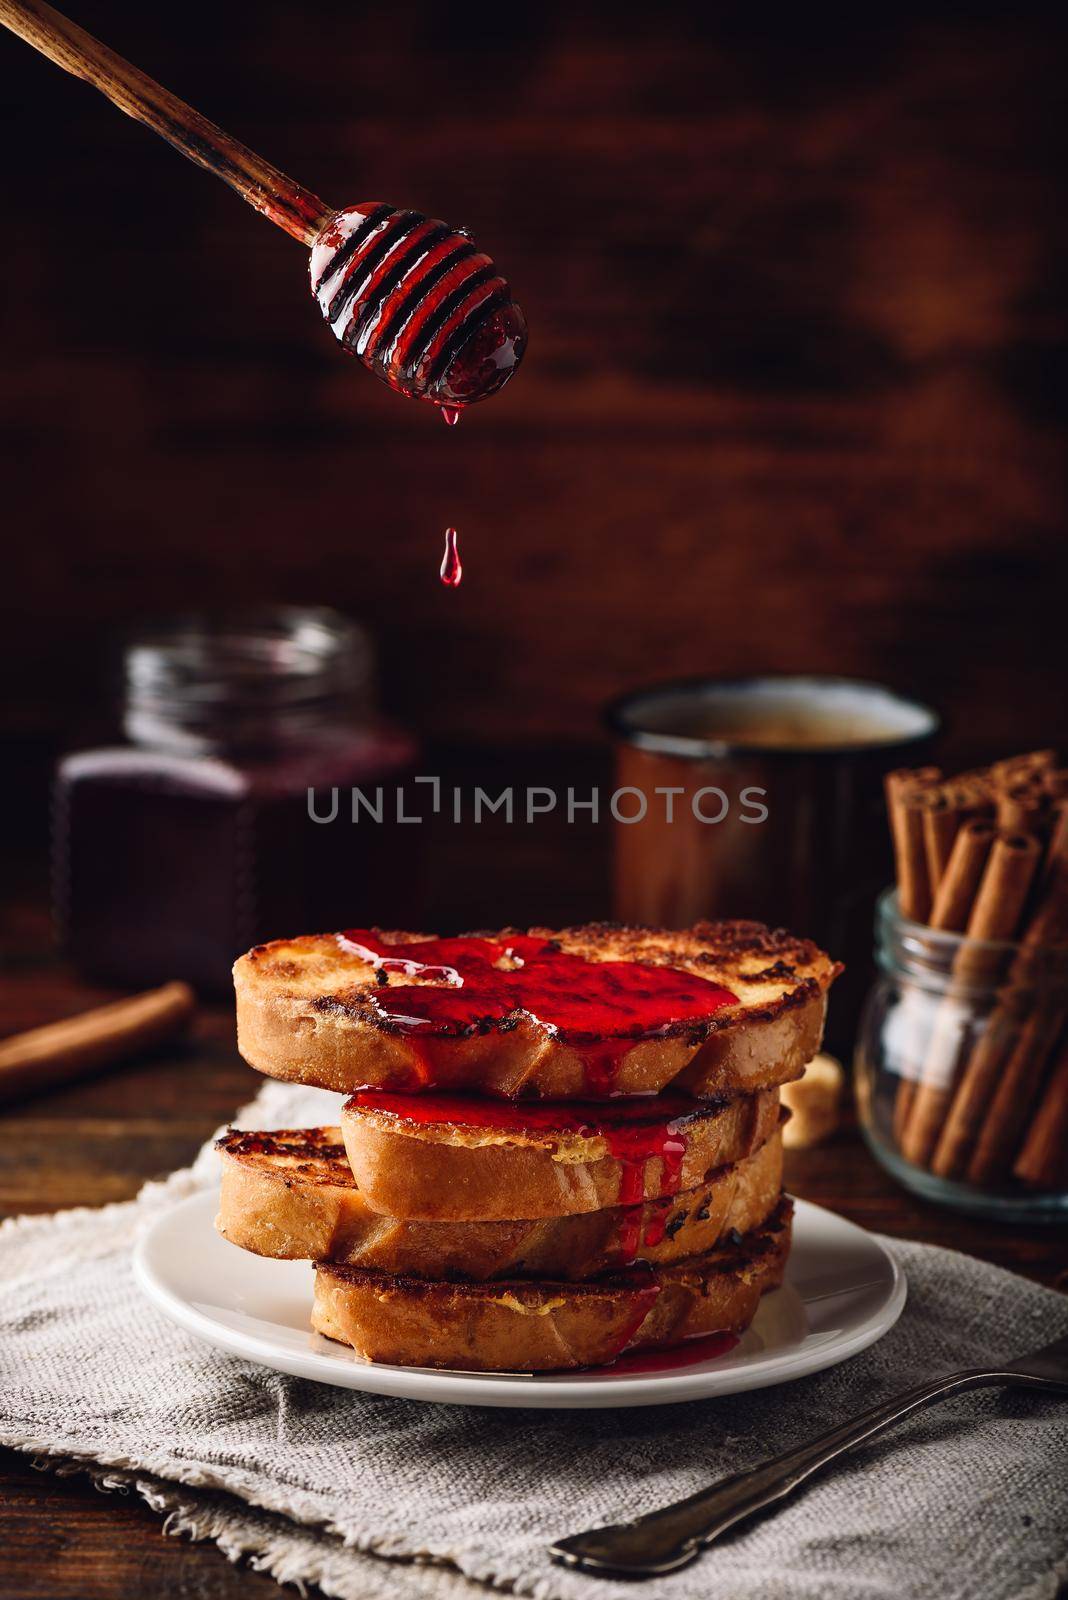 Stack of french toasts with berry syrup on white plate